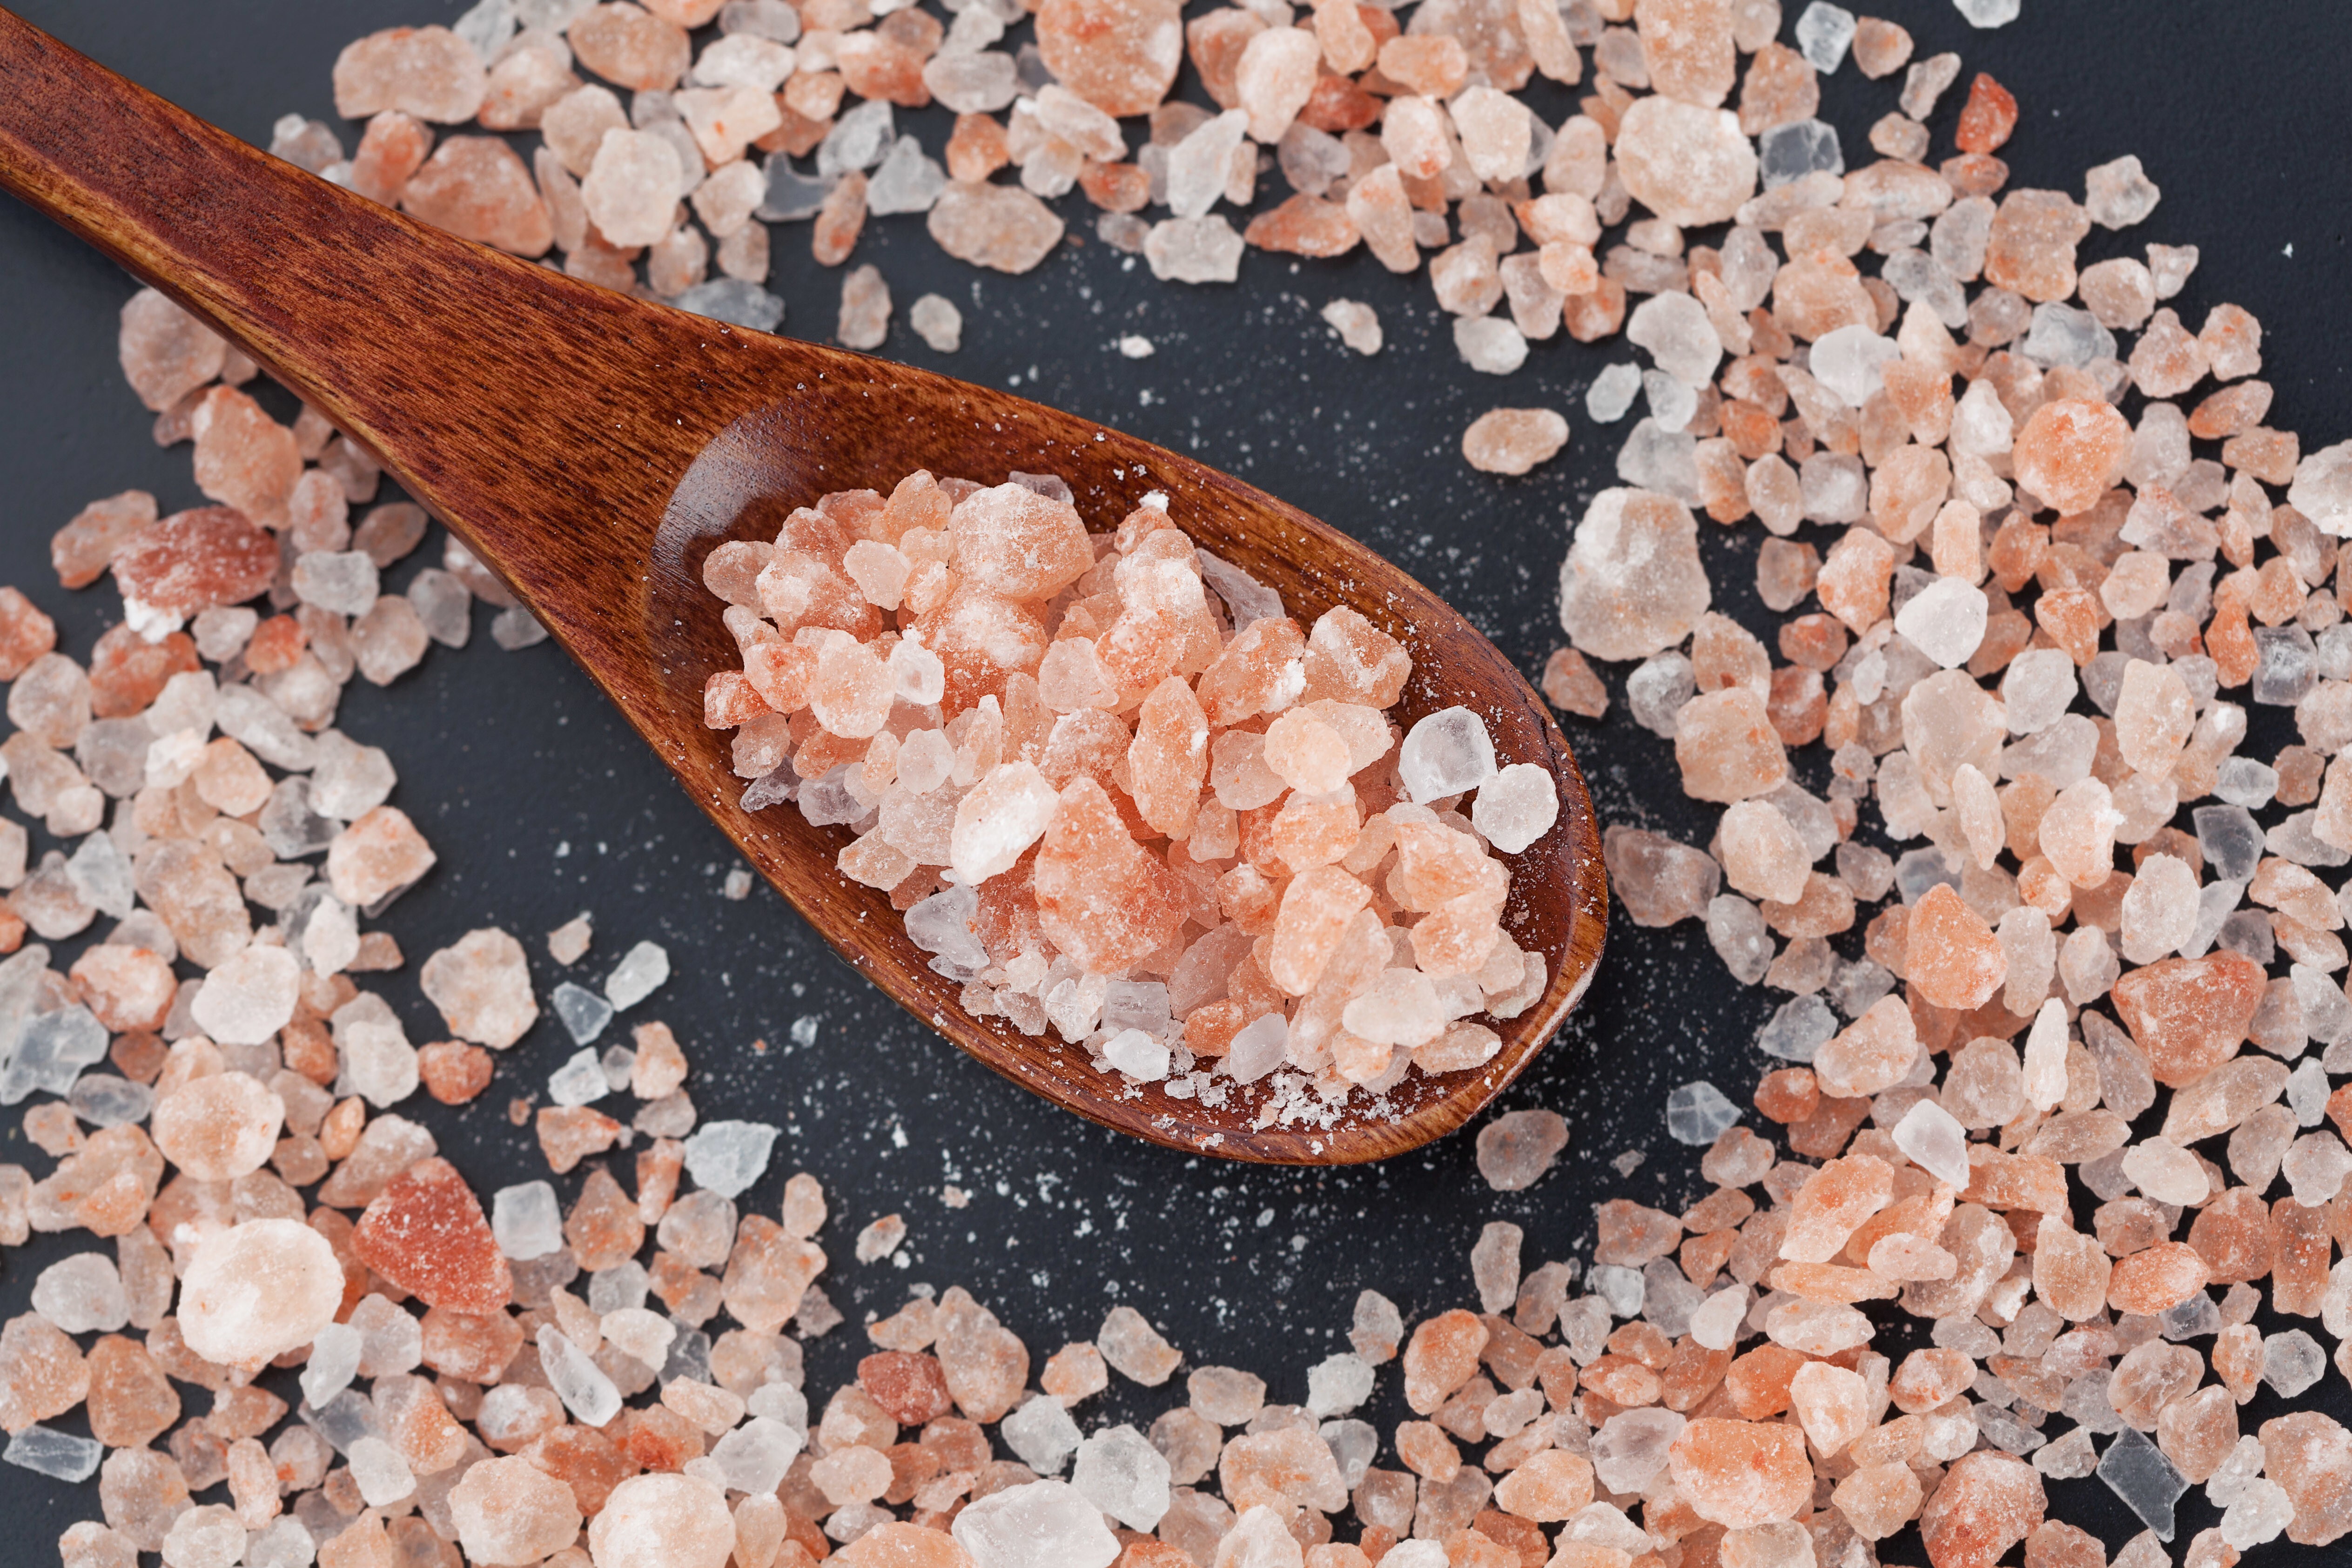 Pricey Himalayan rock salt tested by Hong Kong’s consumer watchdog was one of those found to contain metal contaminates. Photo: Getty Images